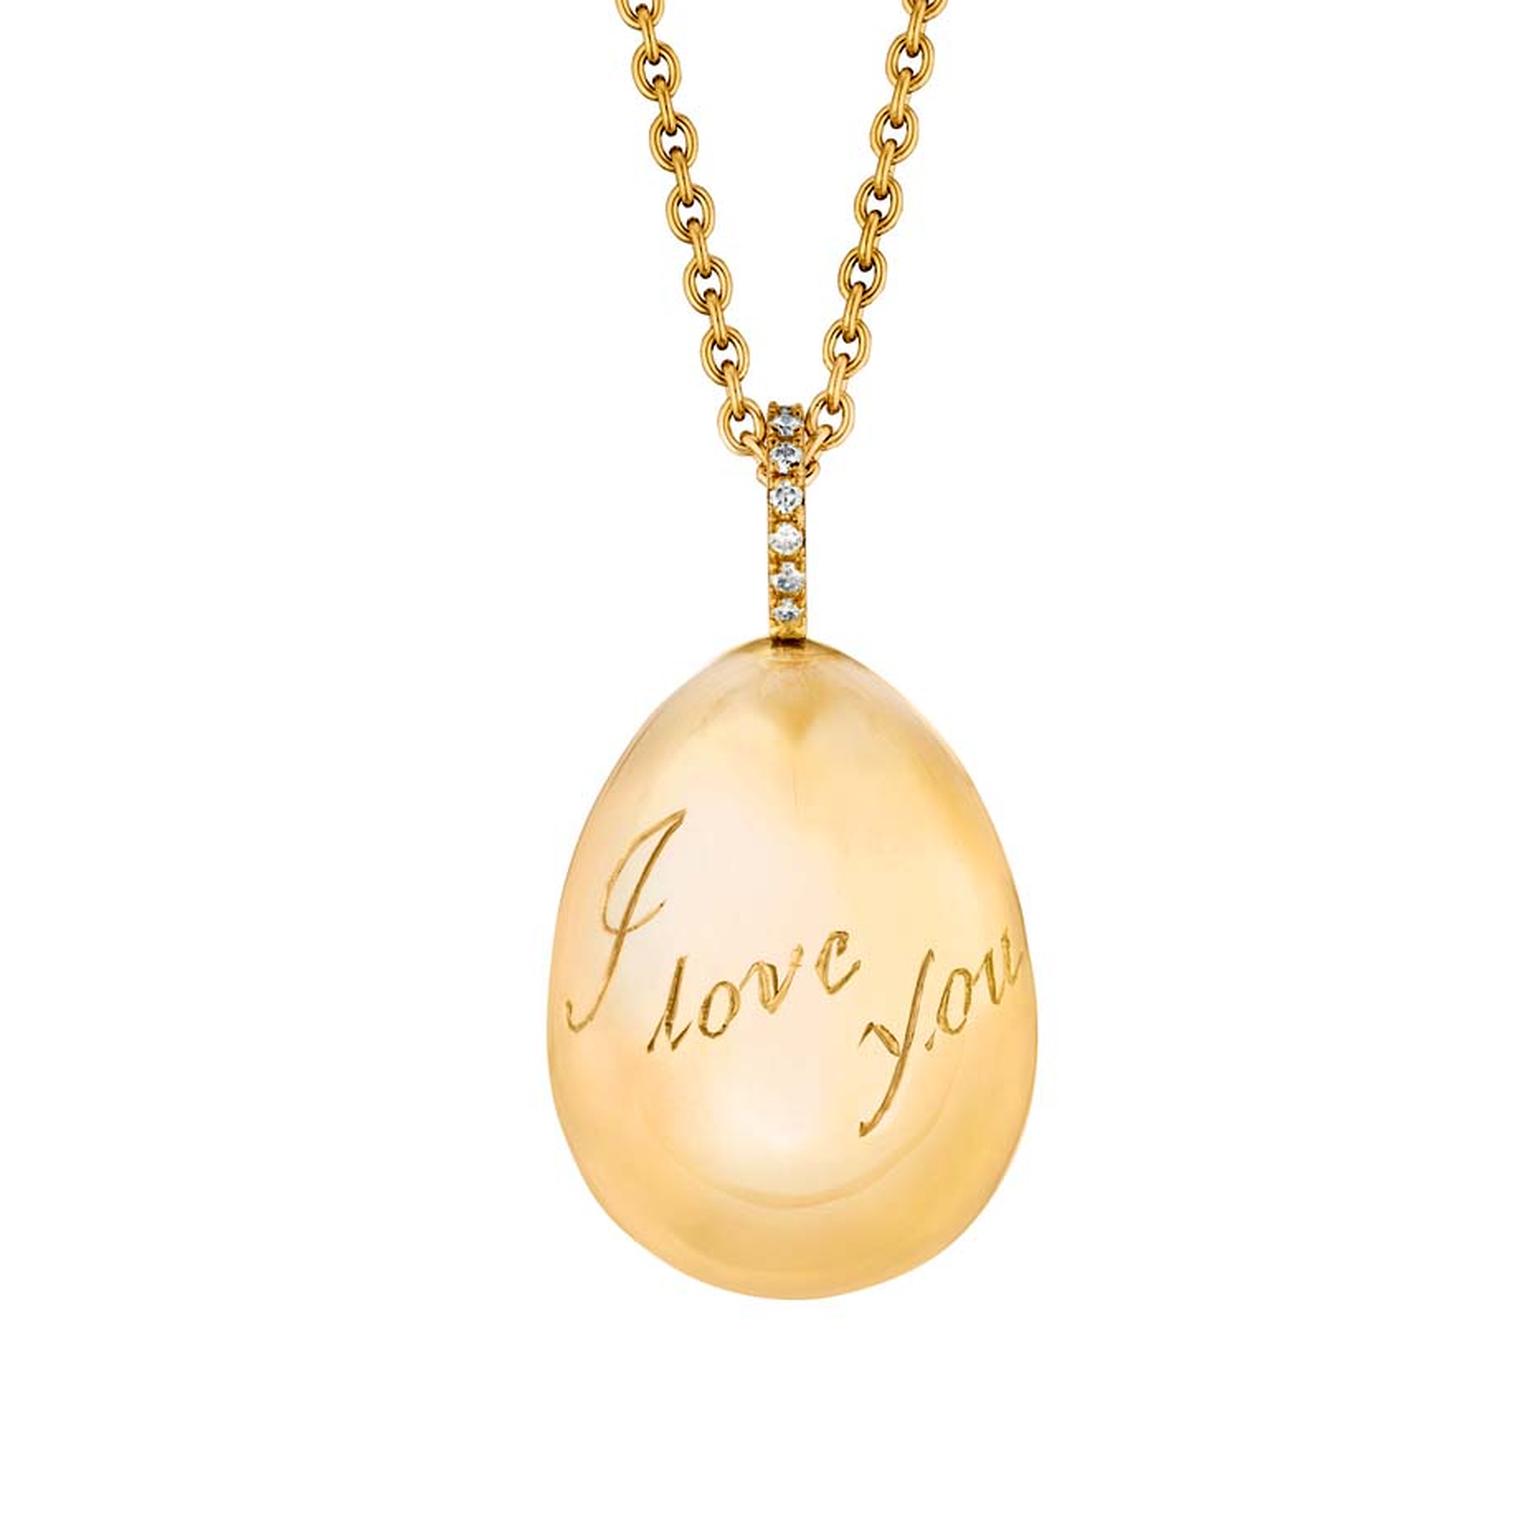 Fabergé egg pendants are available in white, yellow or rose gold, with diamonds. You can choose to personalise your pendant with initials, a date or a message of your choice (£2,815).